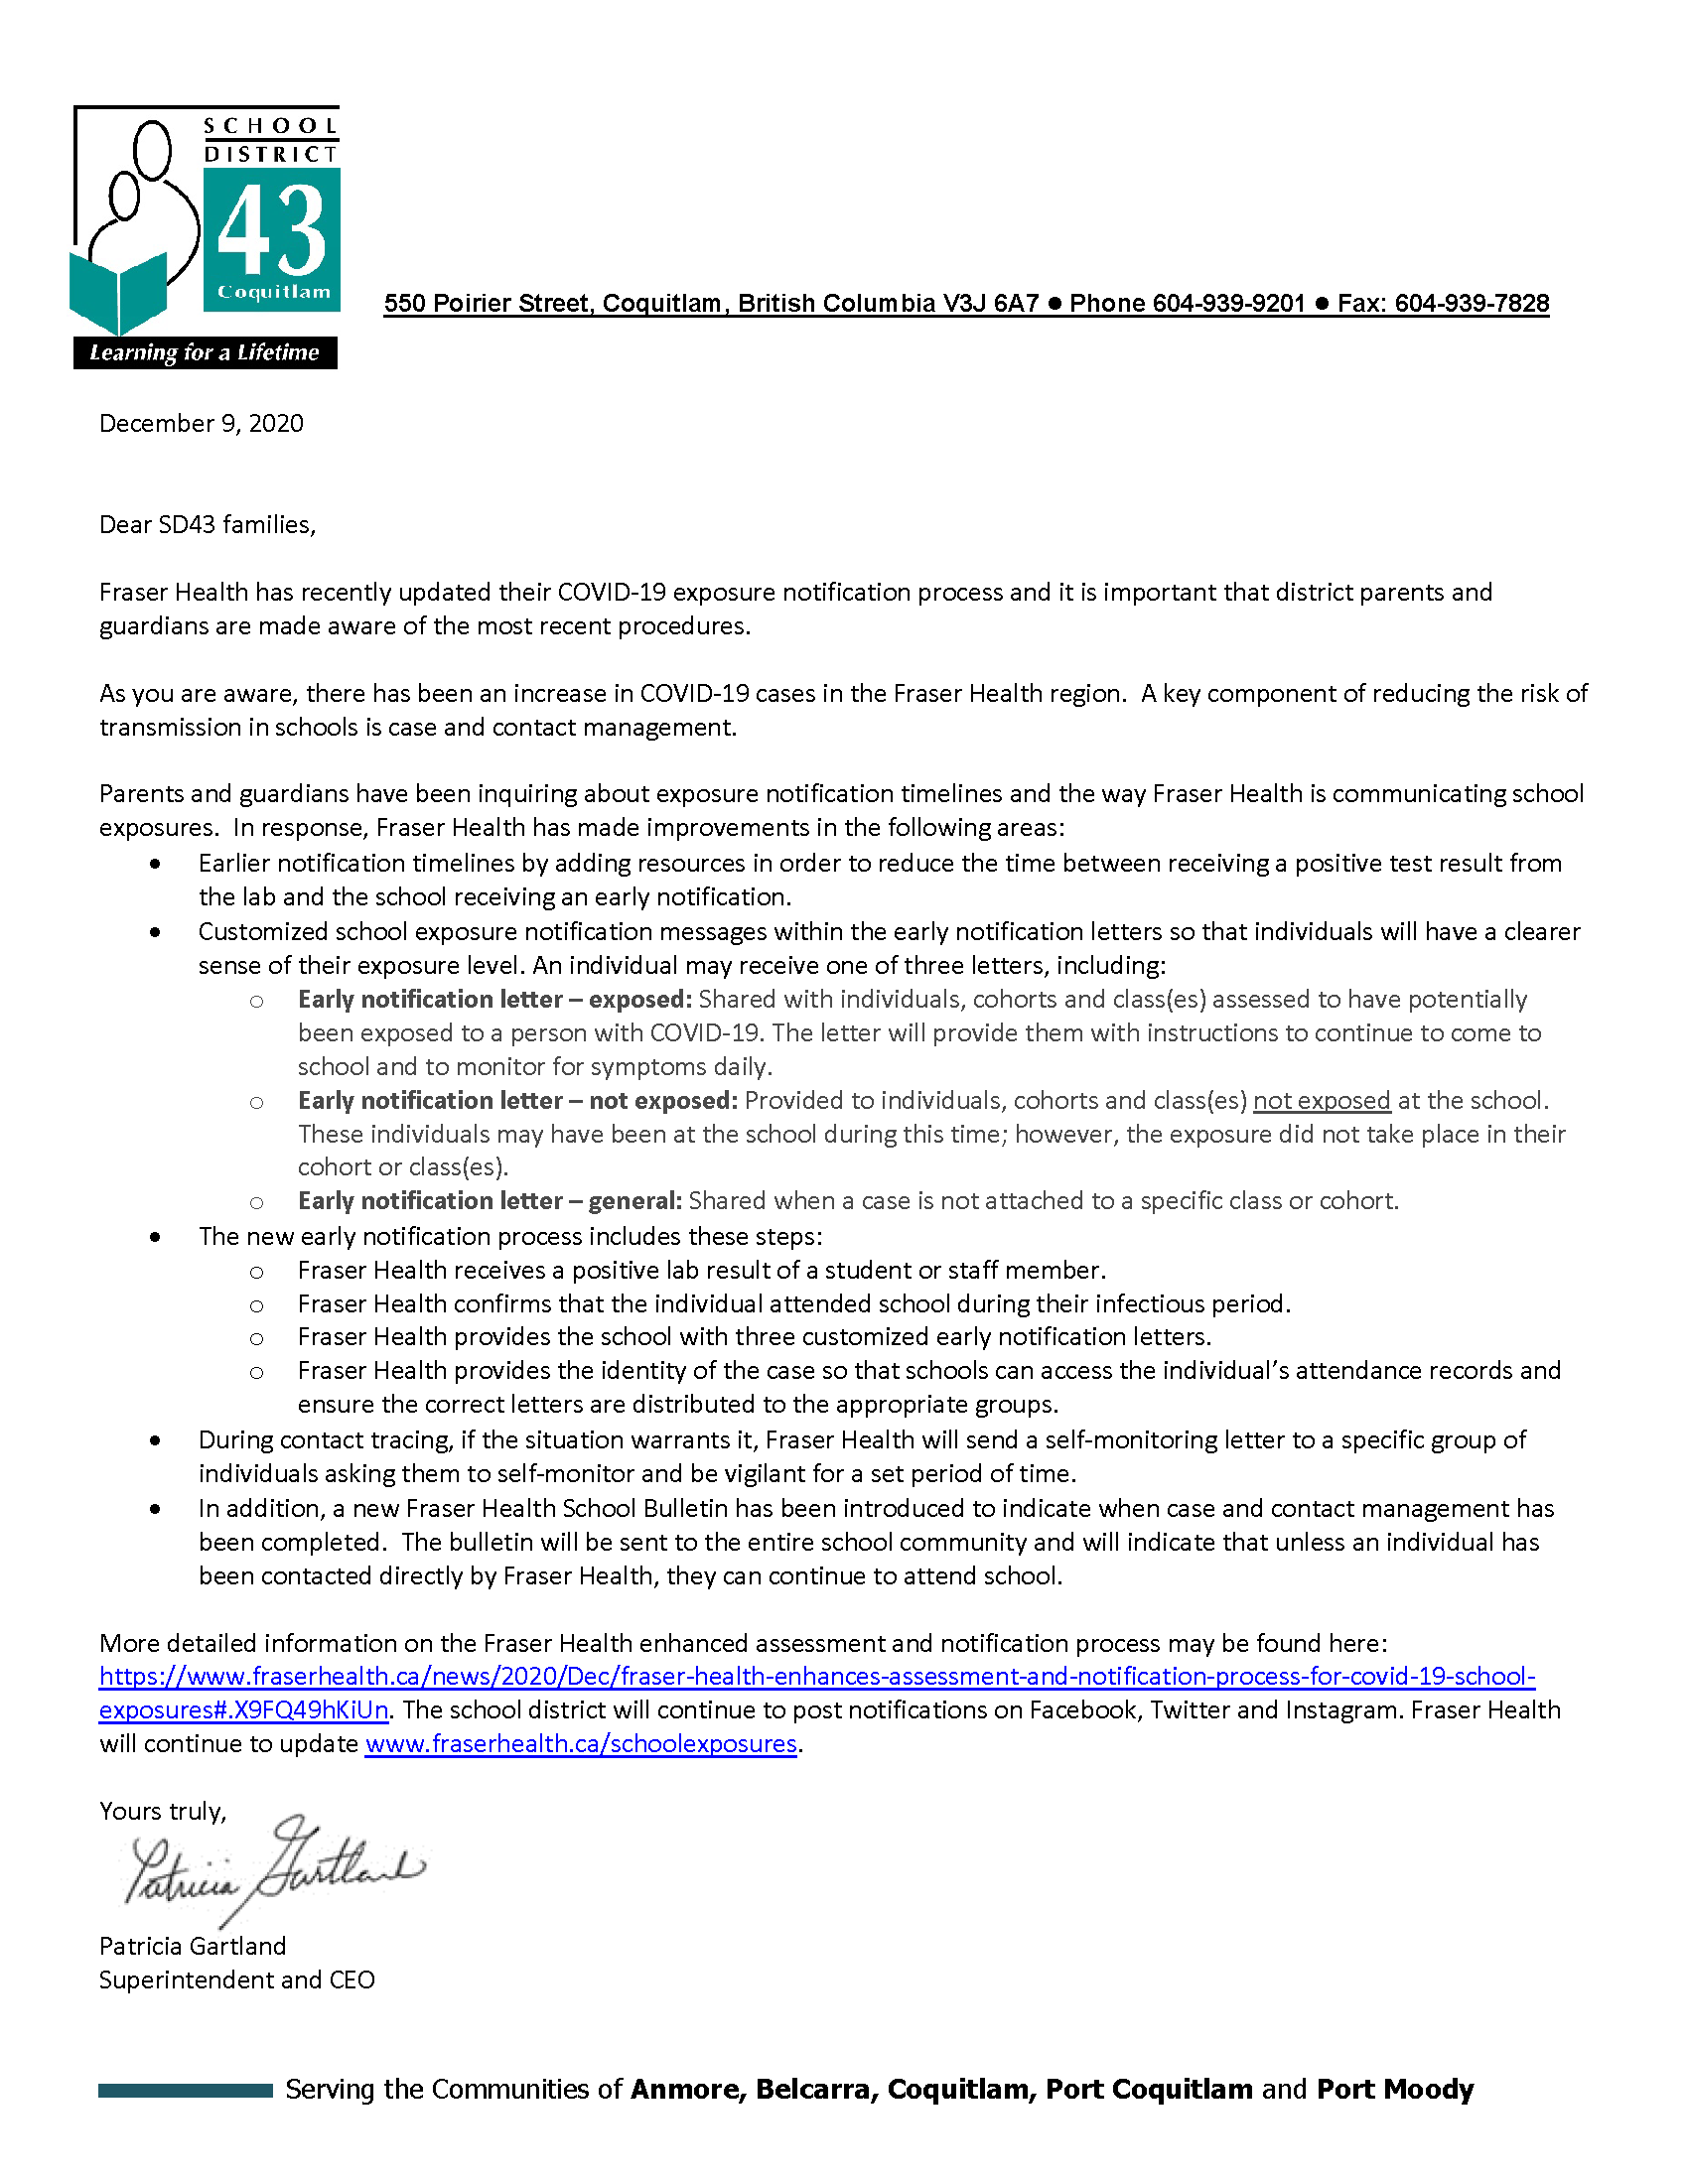 Superintendent's Letter to Families 12-10-2020 - Fraser Health Notification Update.png